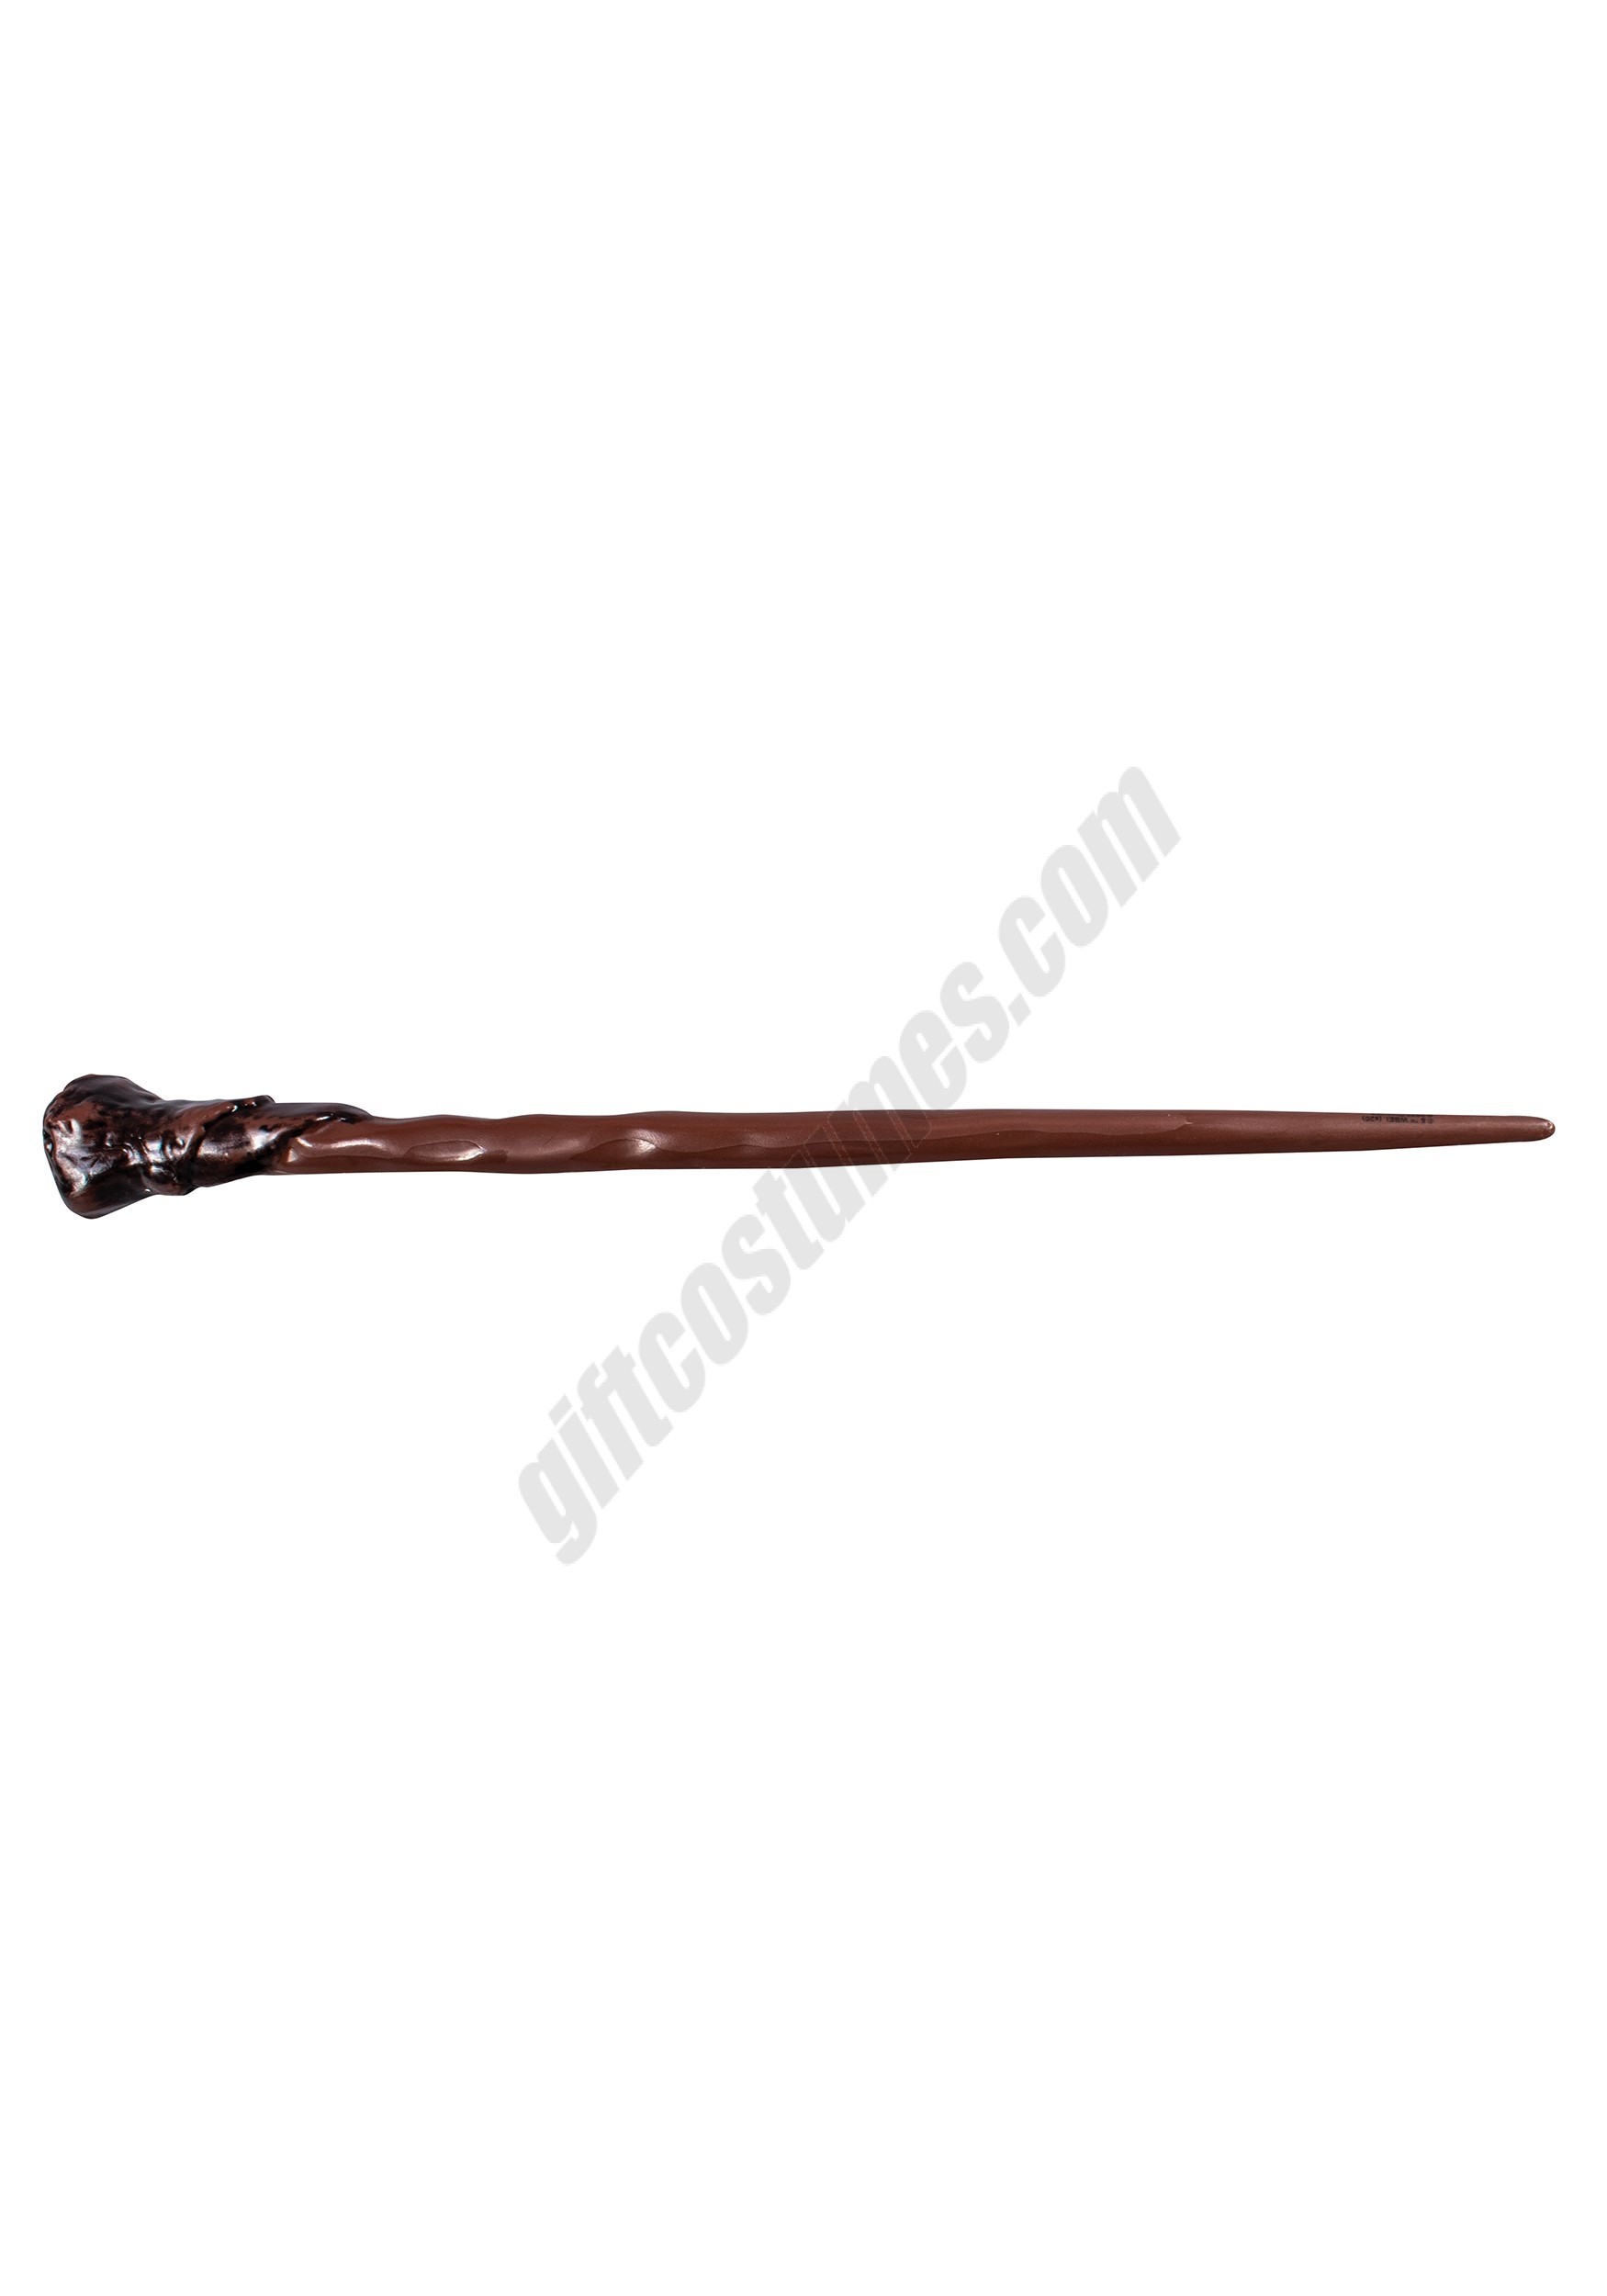 Harry Potter Ron Weasley Wand Promotions - Harry Potter Ron Weasley Wand Promotions